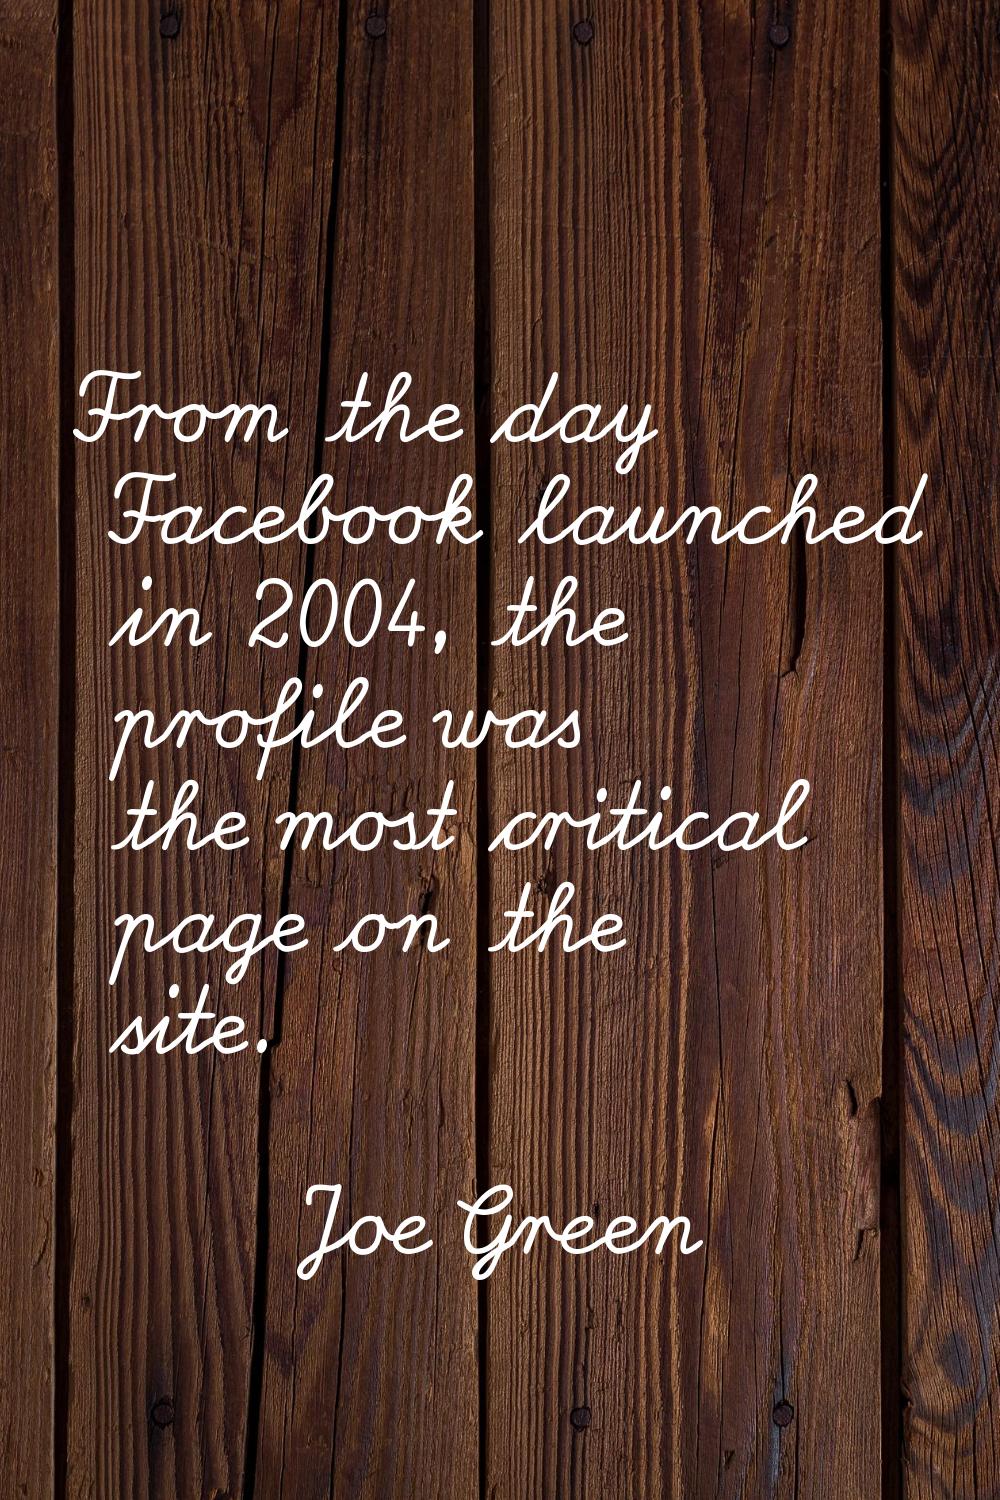 From the day Facebook launched in 2004, the profile was the most critical page on the site.